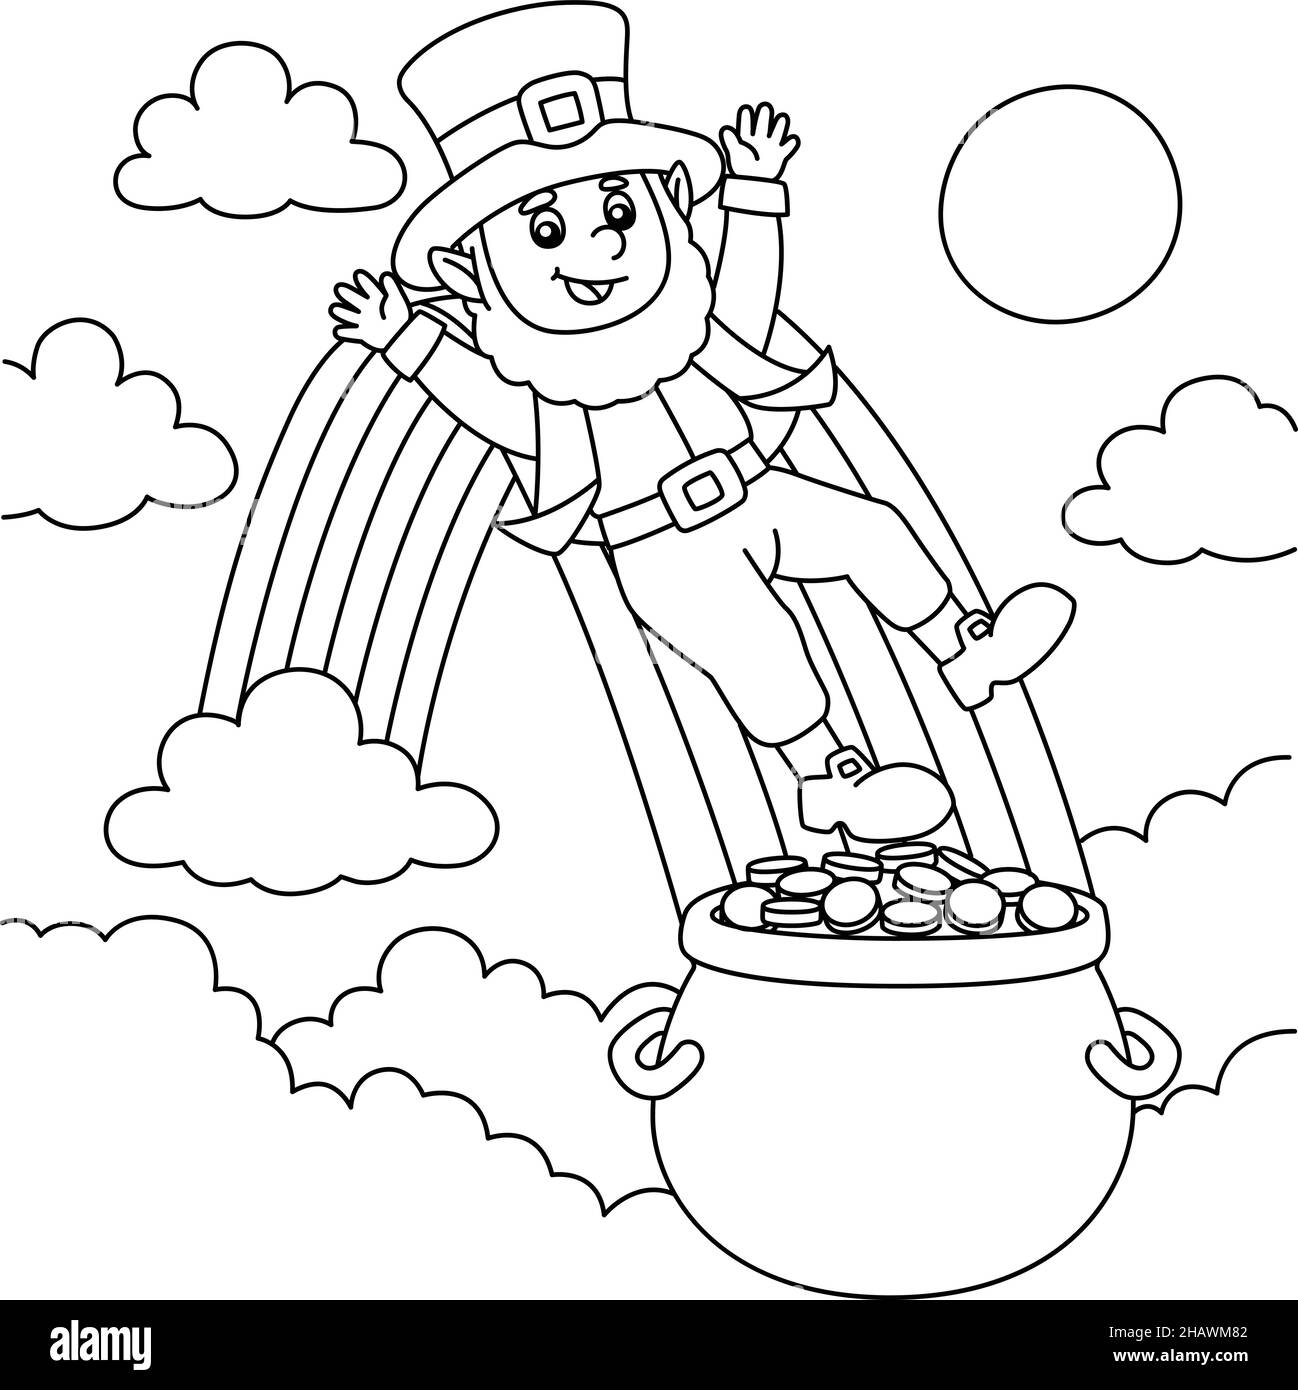 St patricks day leprechaun coloring page for kids stock vector image art